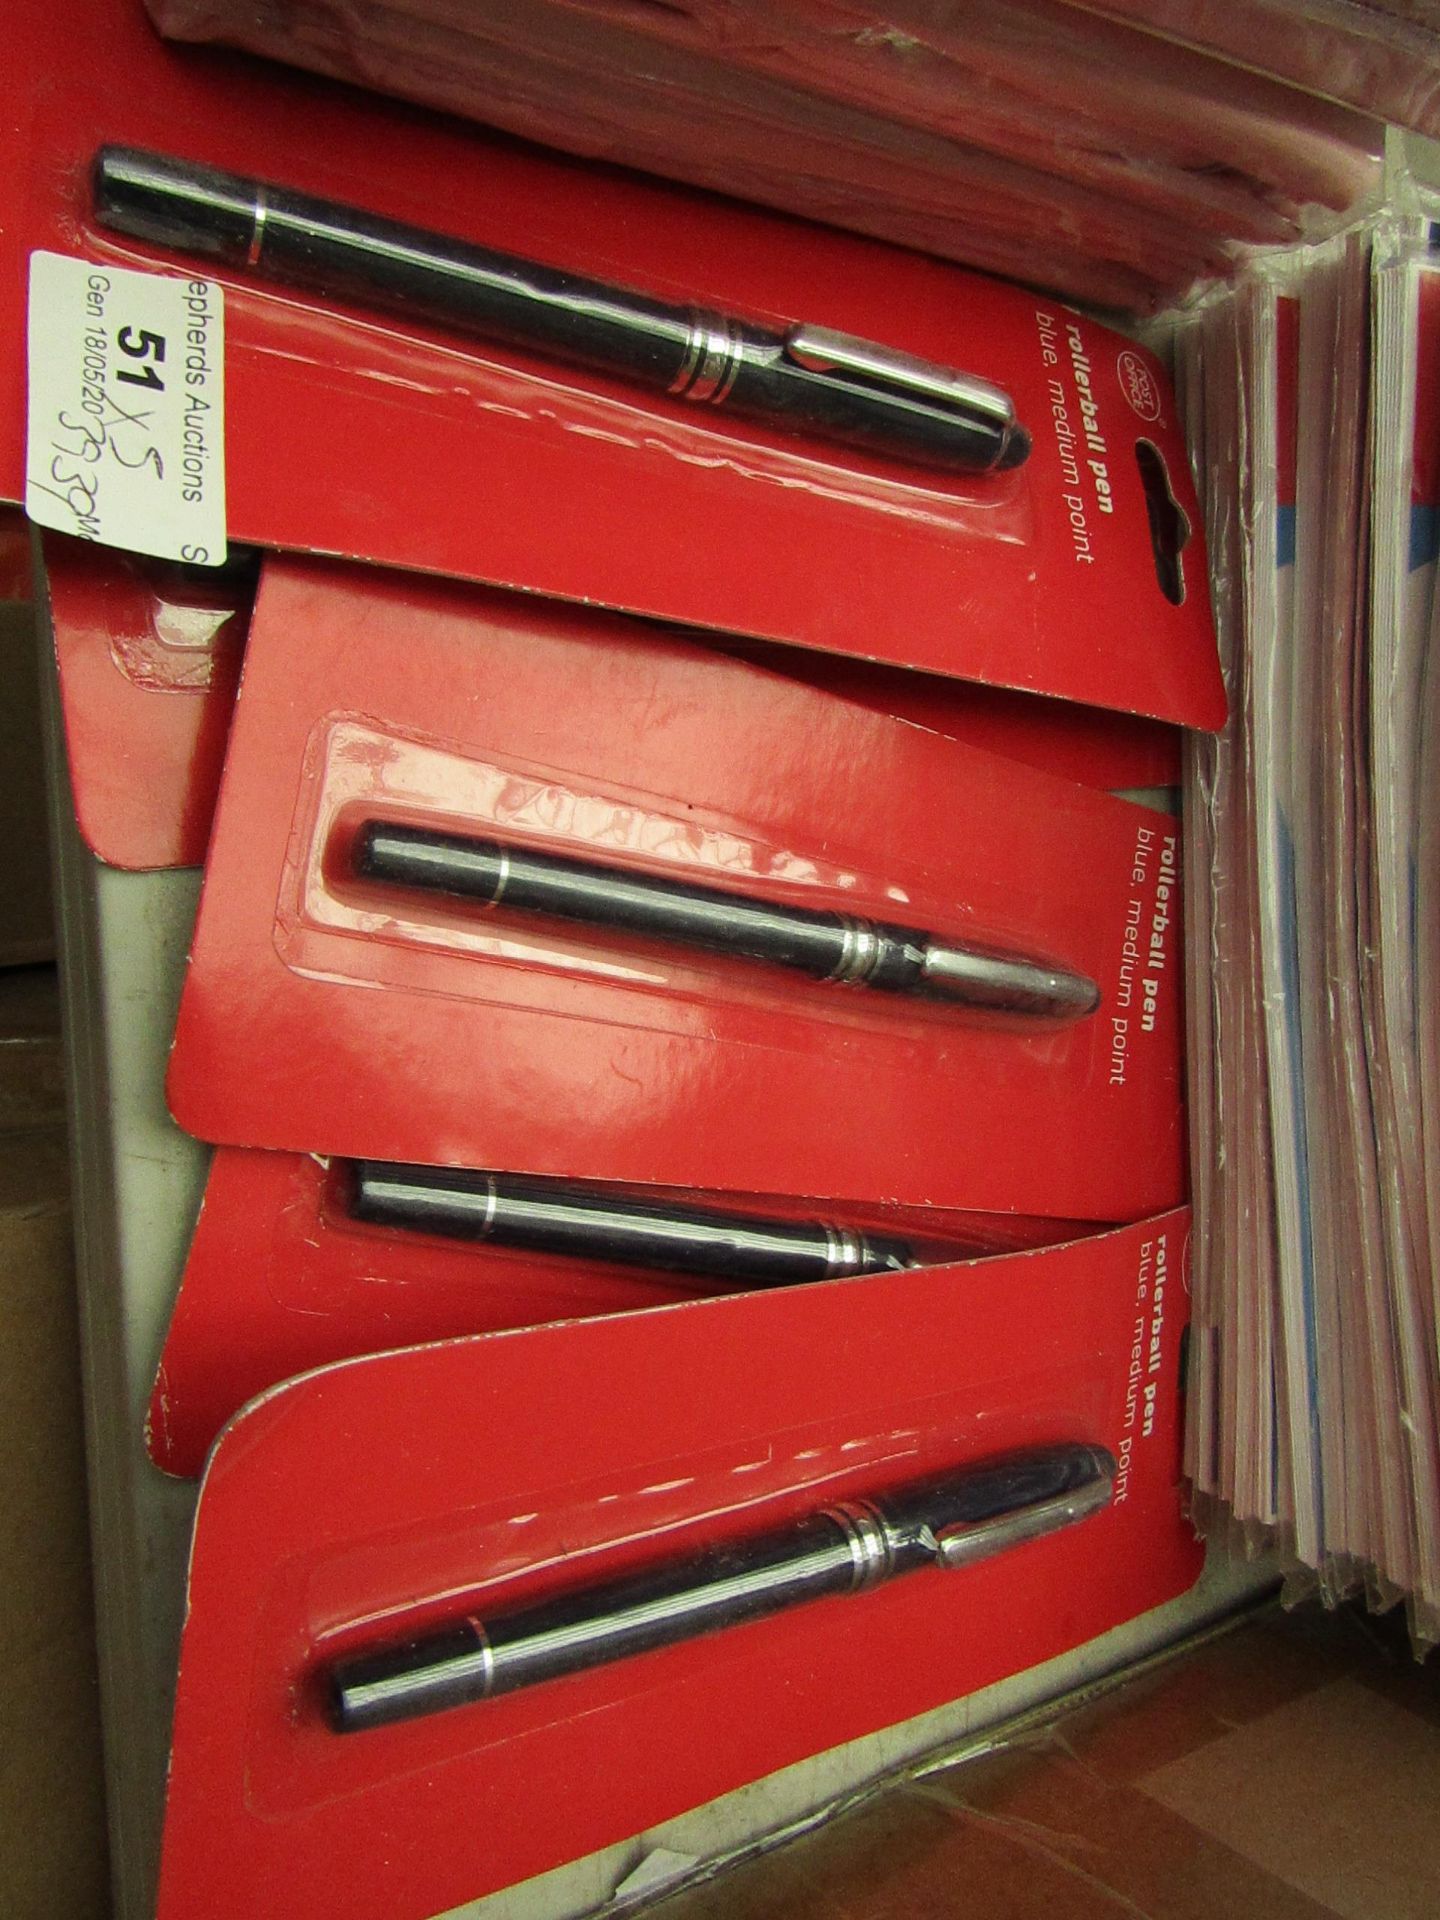 5 x Post Office Rollerball Pens with Blue Ink. Packaged